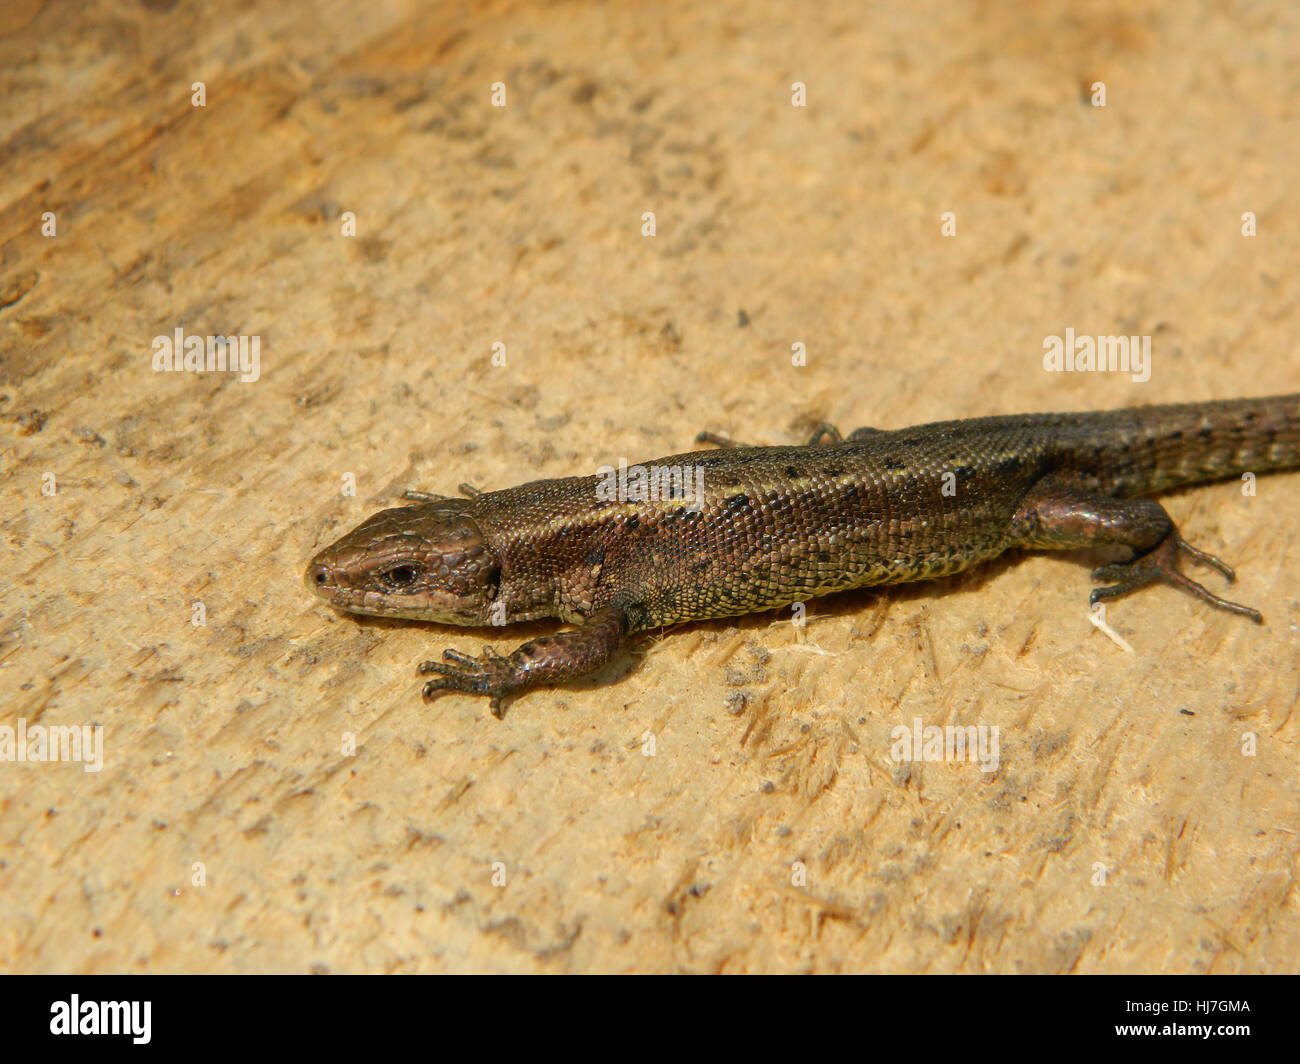 Group of squamate reptiles. Lizard from Lithuania. Stock Photo